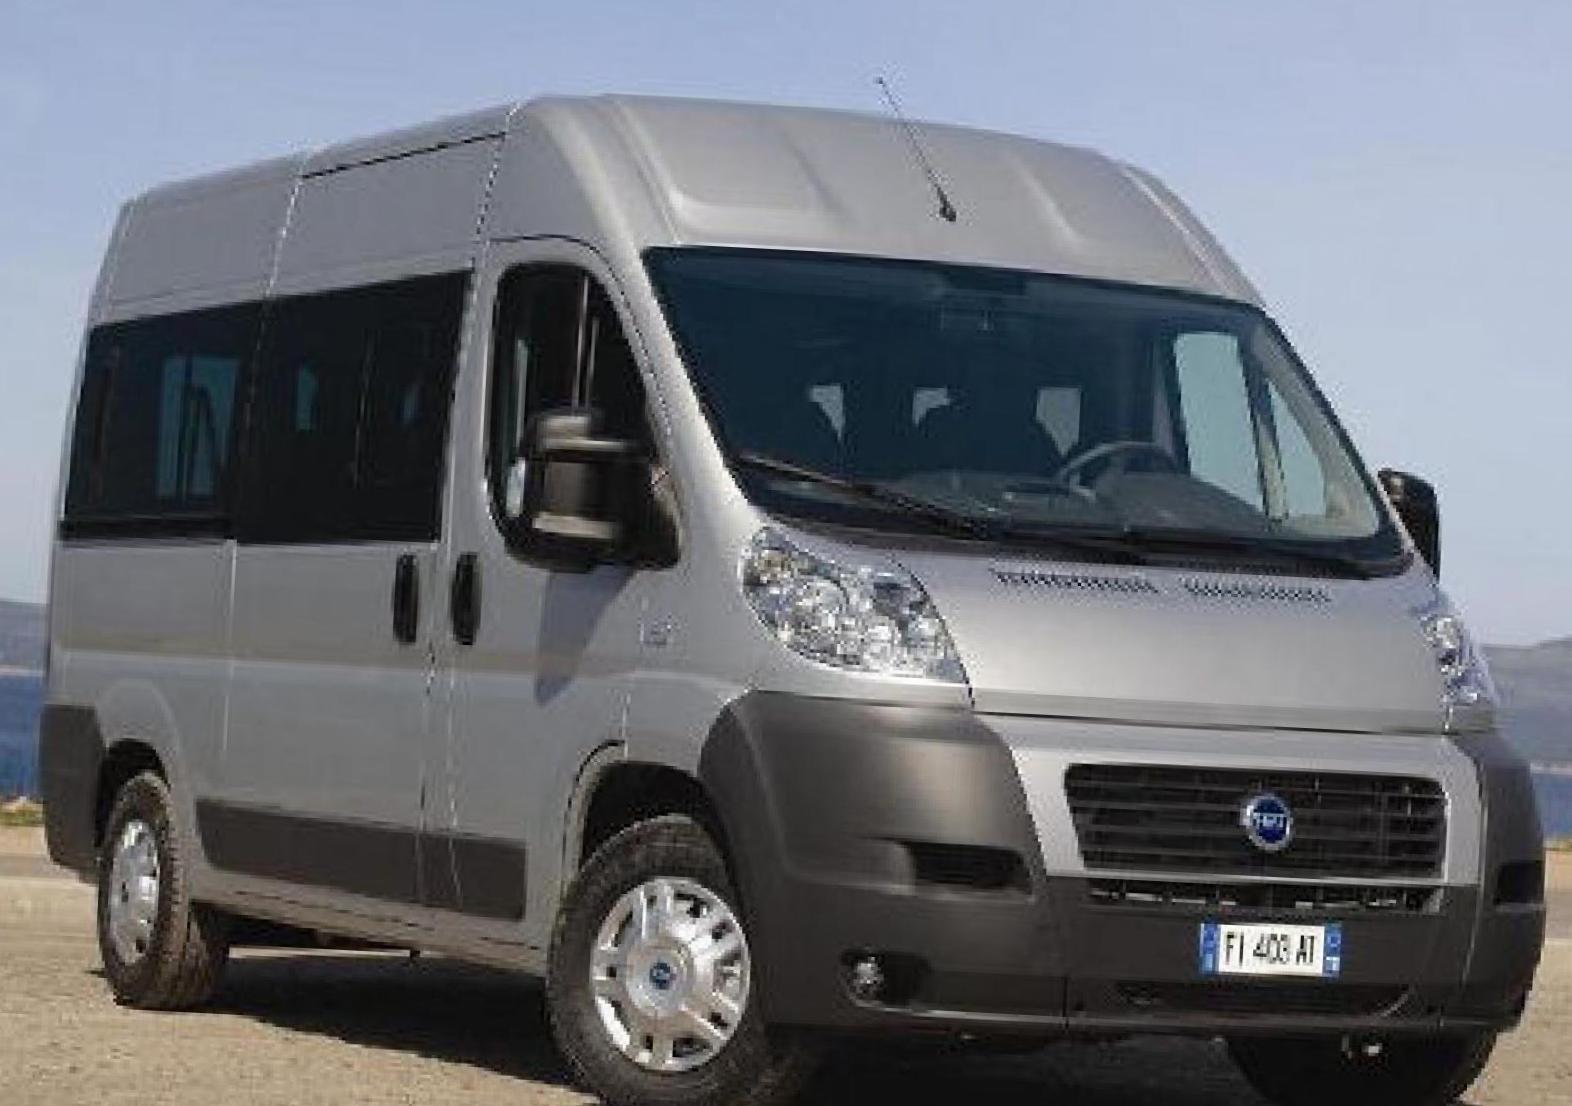 Ducato Panorama Fiat lease hatchback